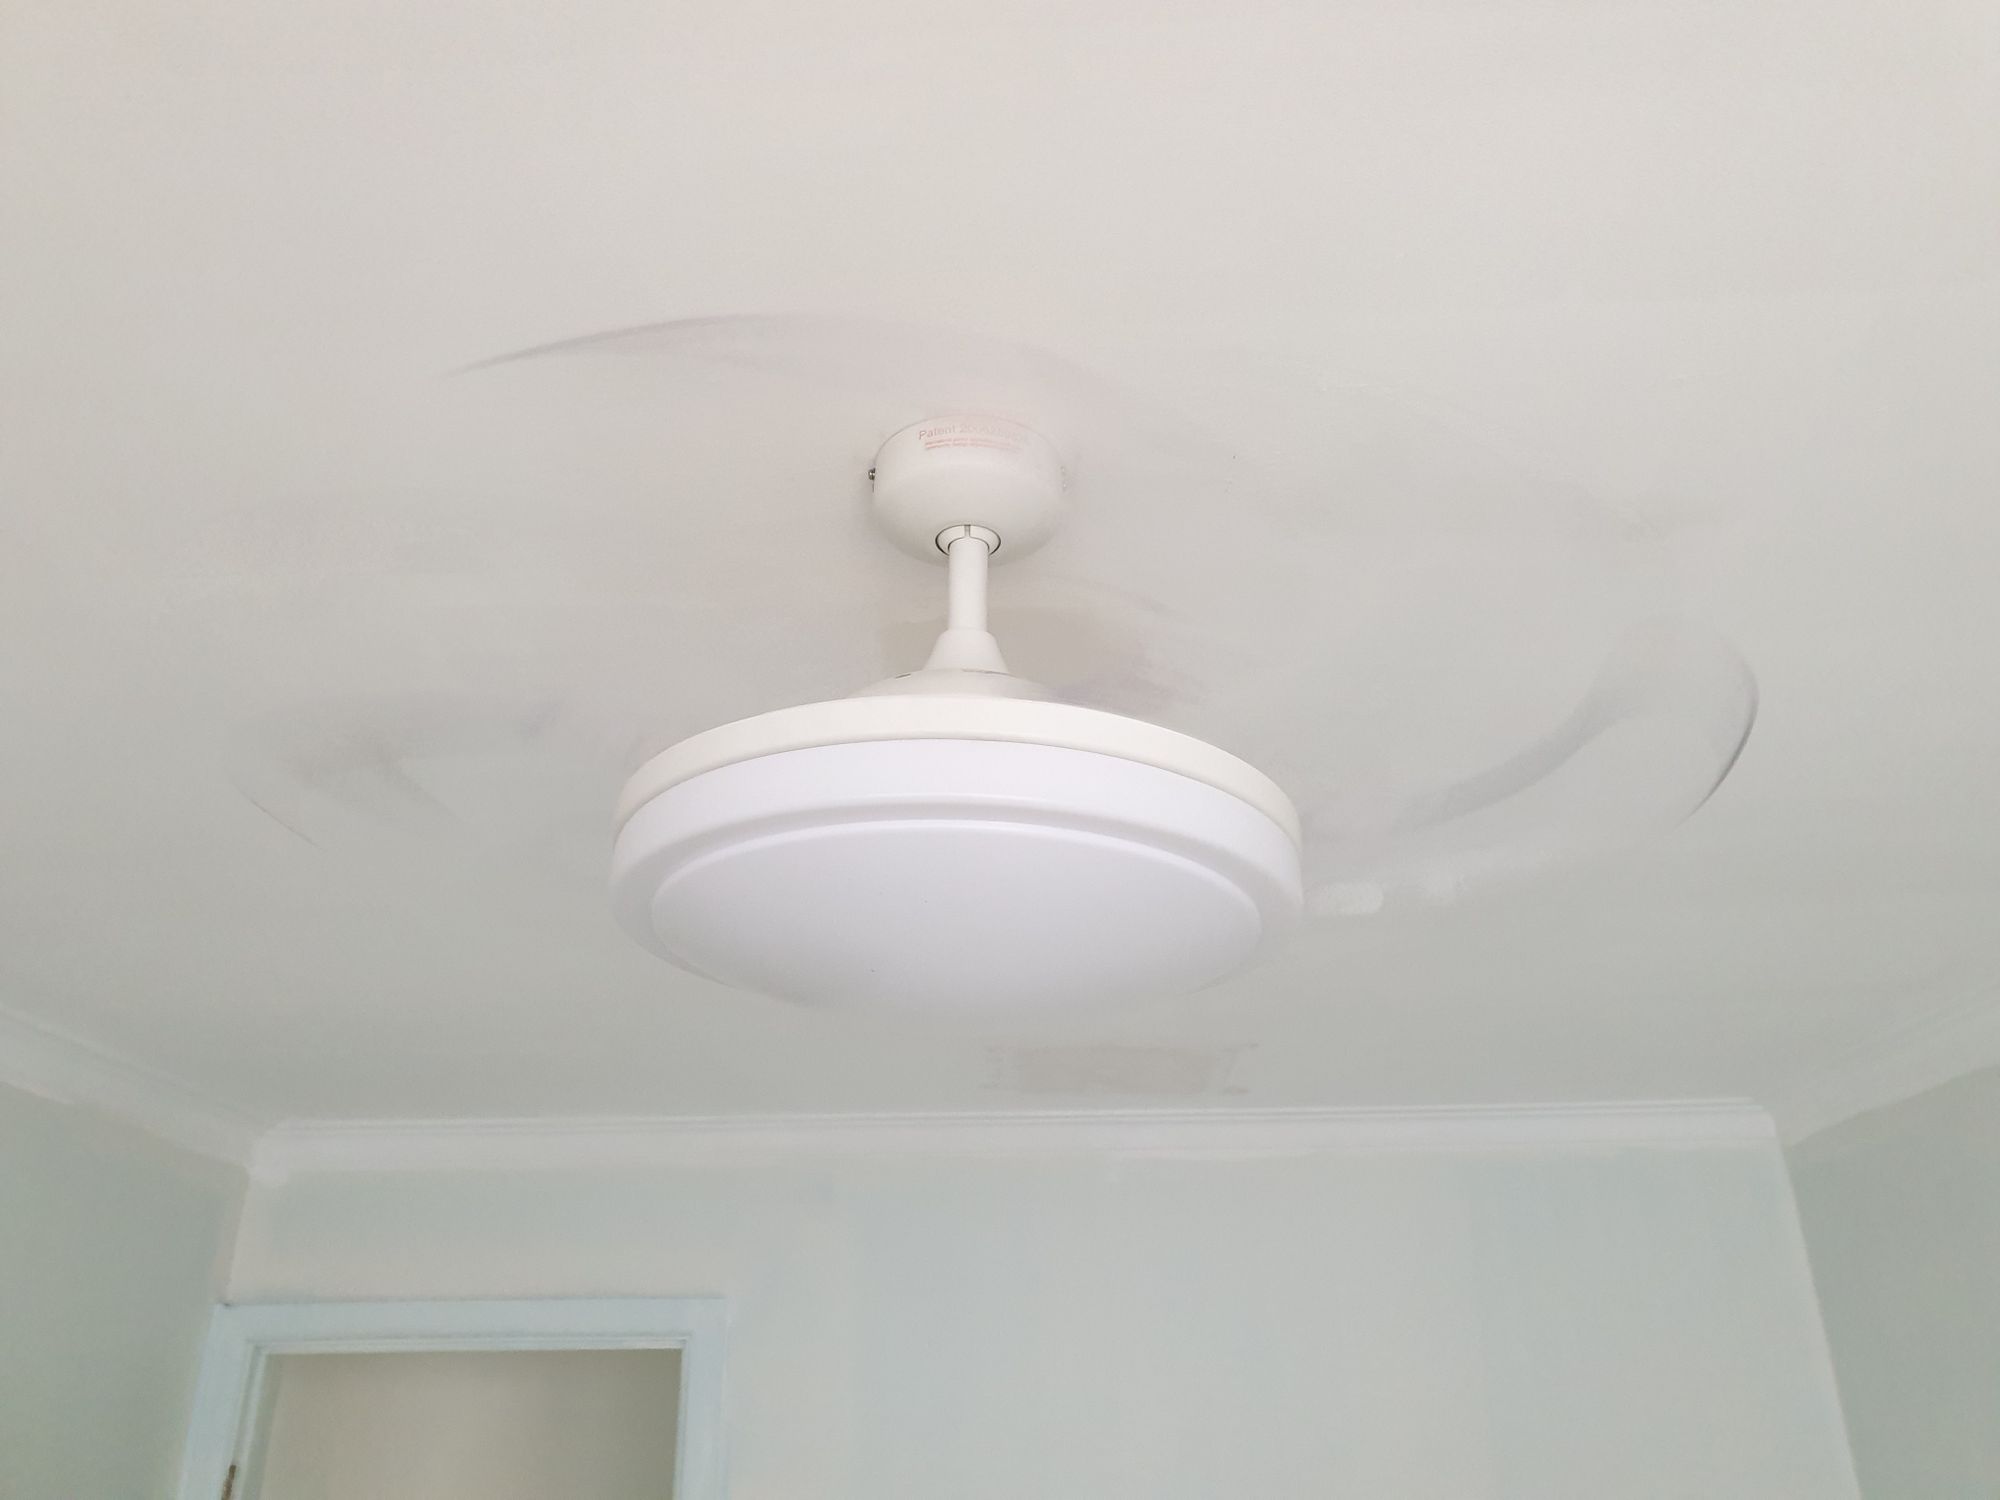 Photo of the same ceiling light, with fan blades just showing